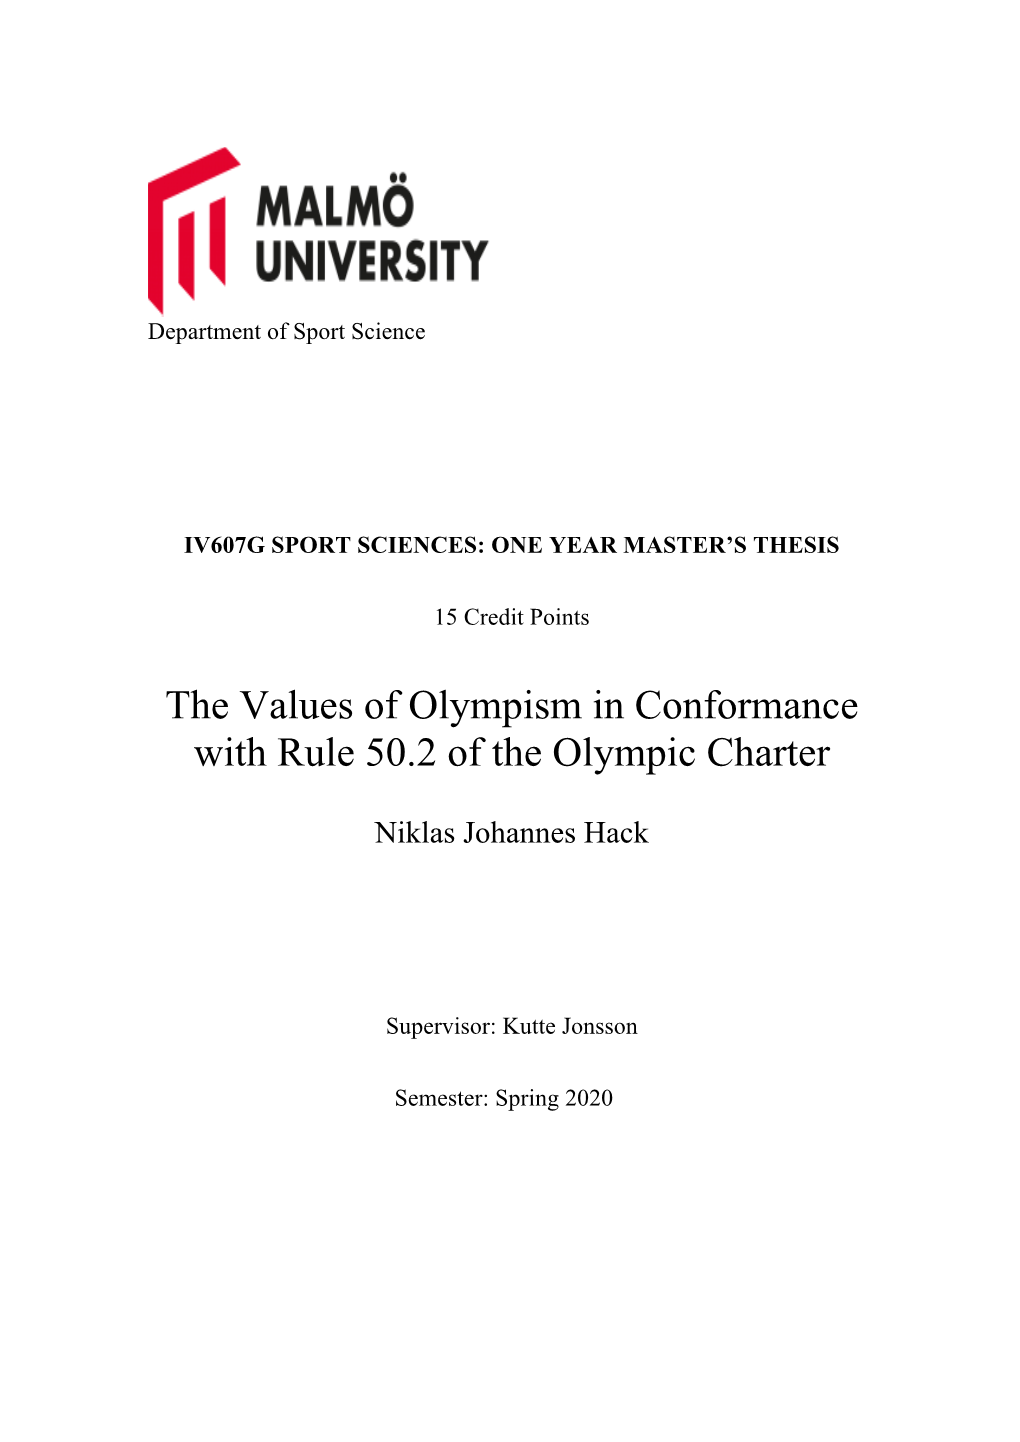 Download Historic Olympic Charters, There Seems to Be a Limited Interest in Research on the Evolution of Rule 50.2